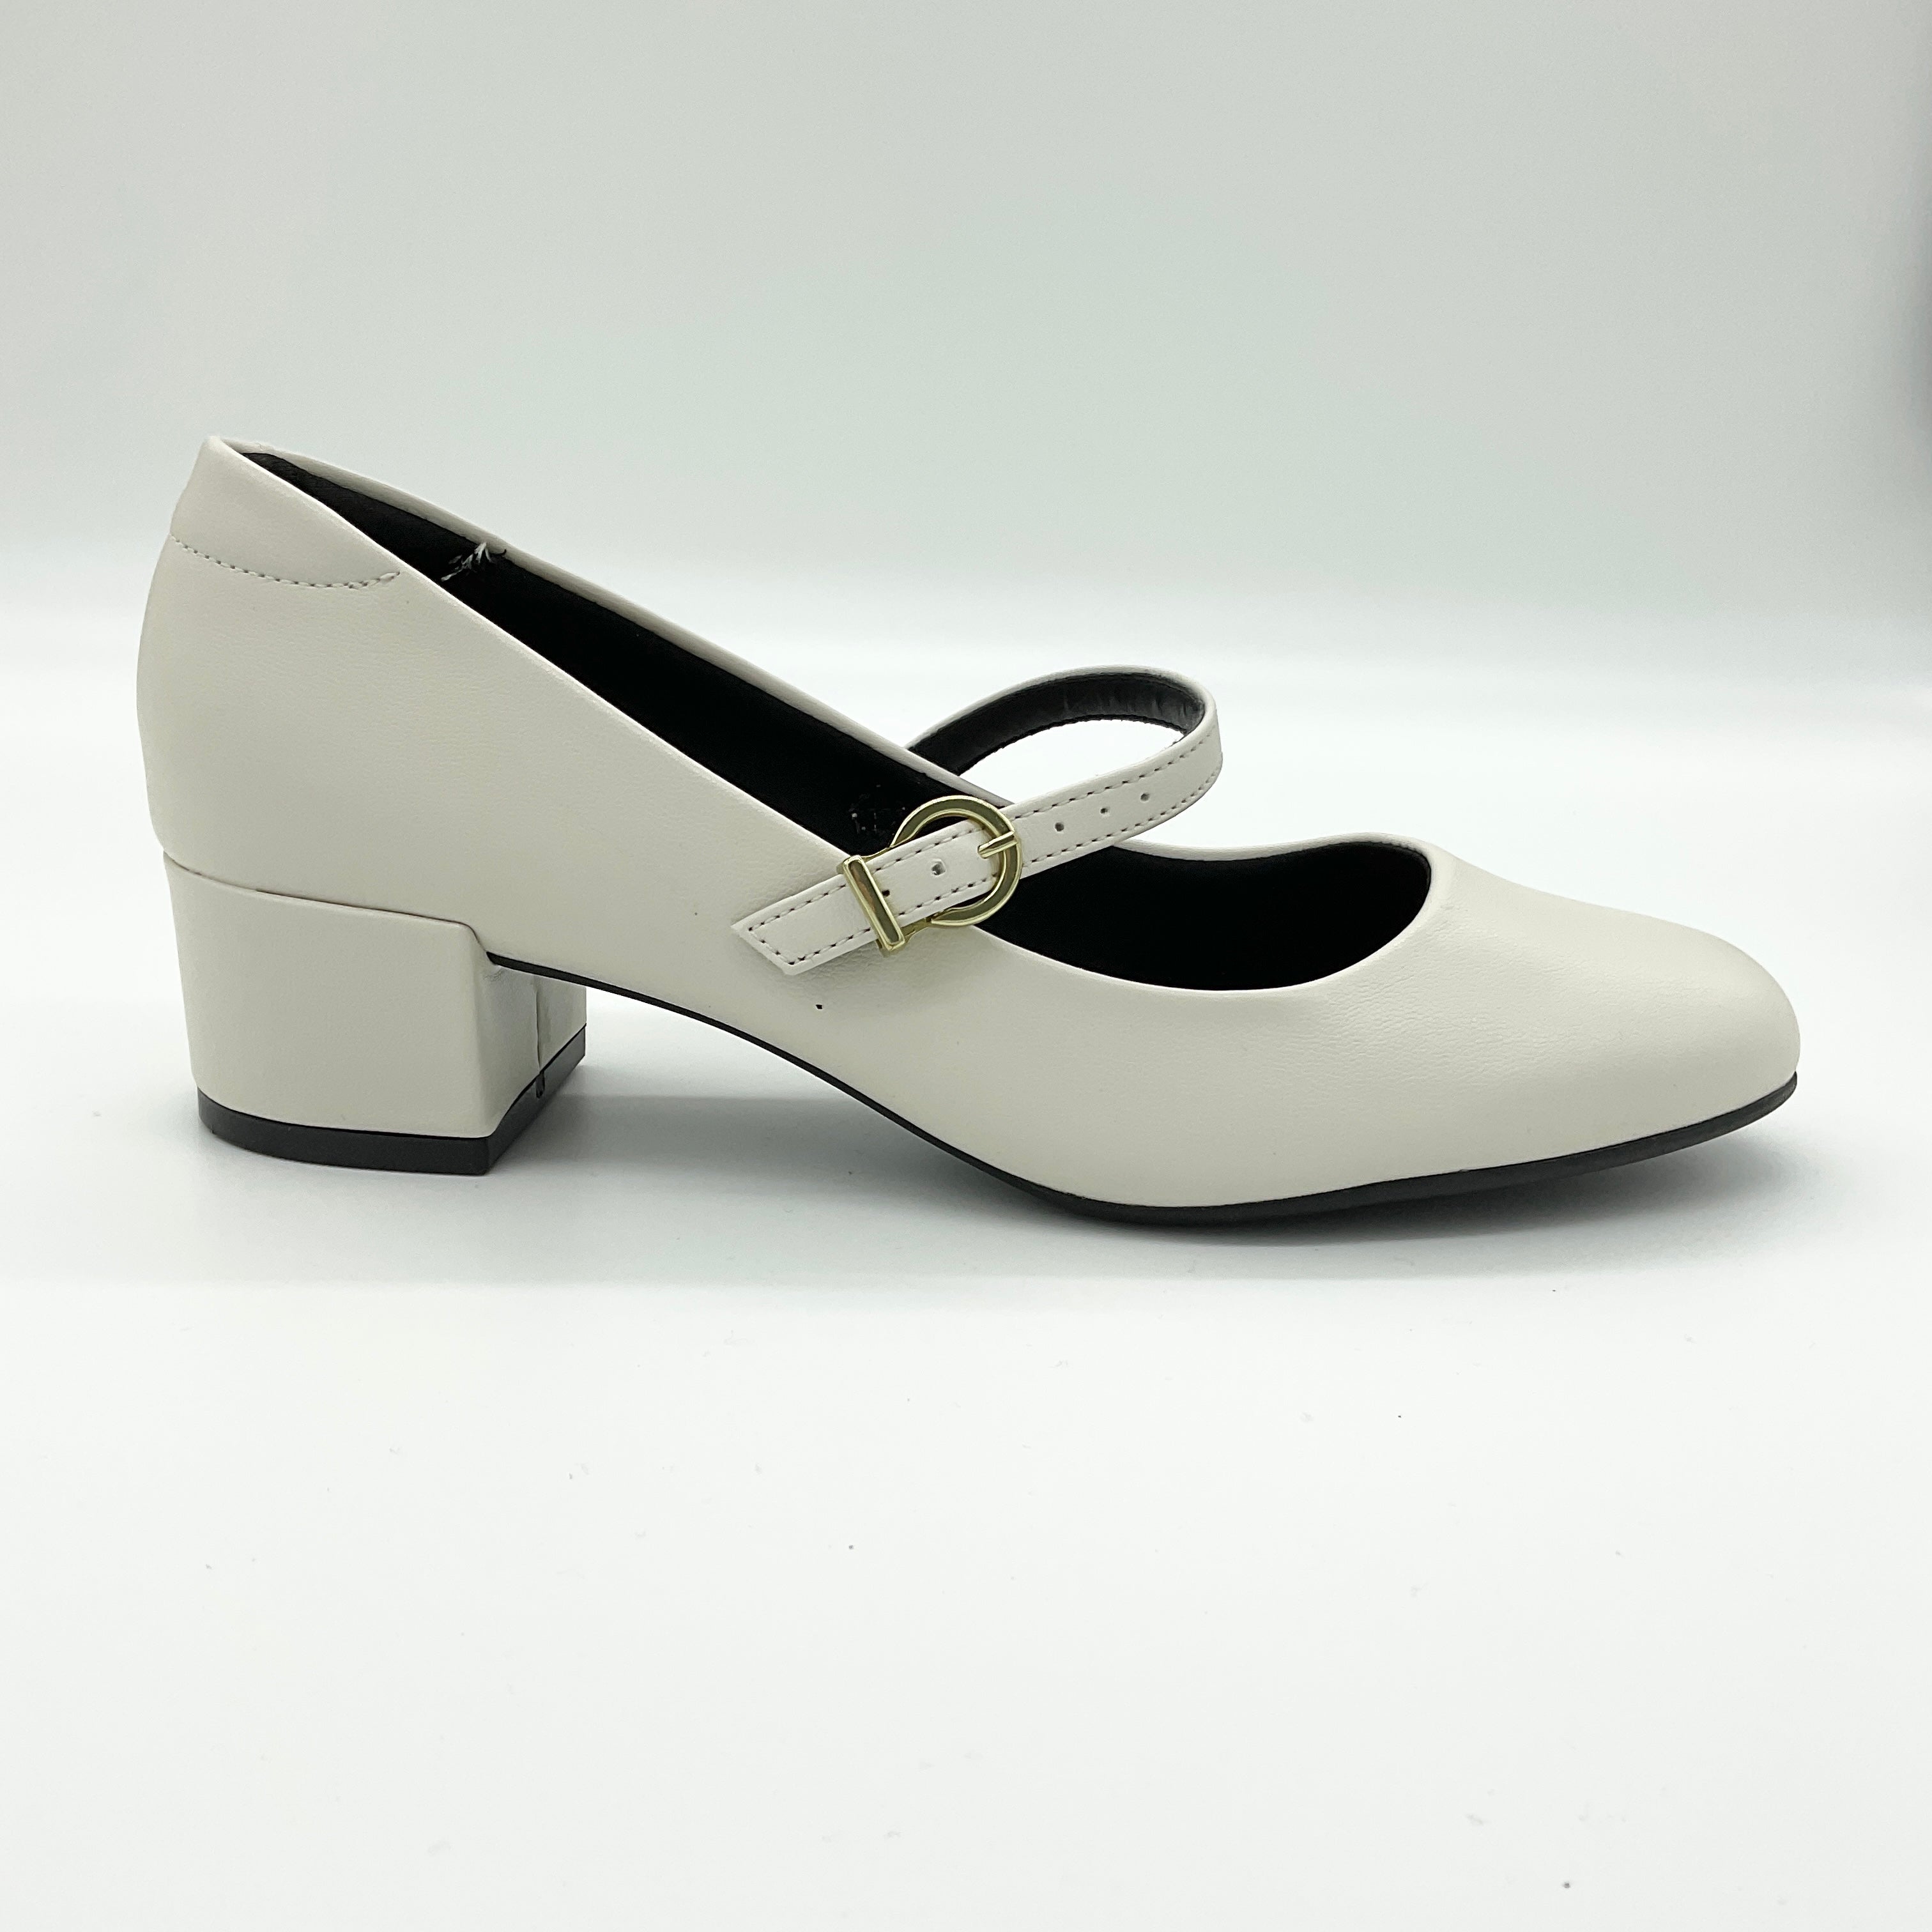 Beira Rio 4301-101 Low Heel Mary-Jane Pump in Off White Napa